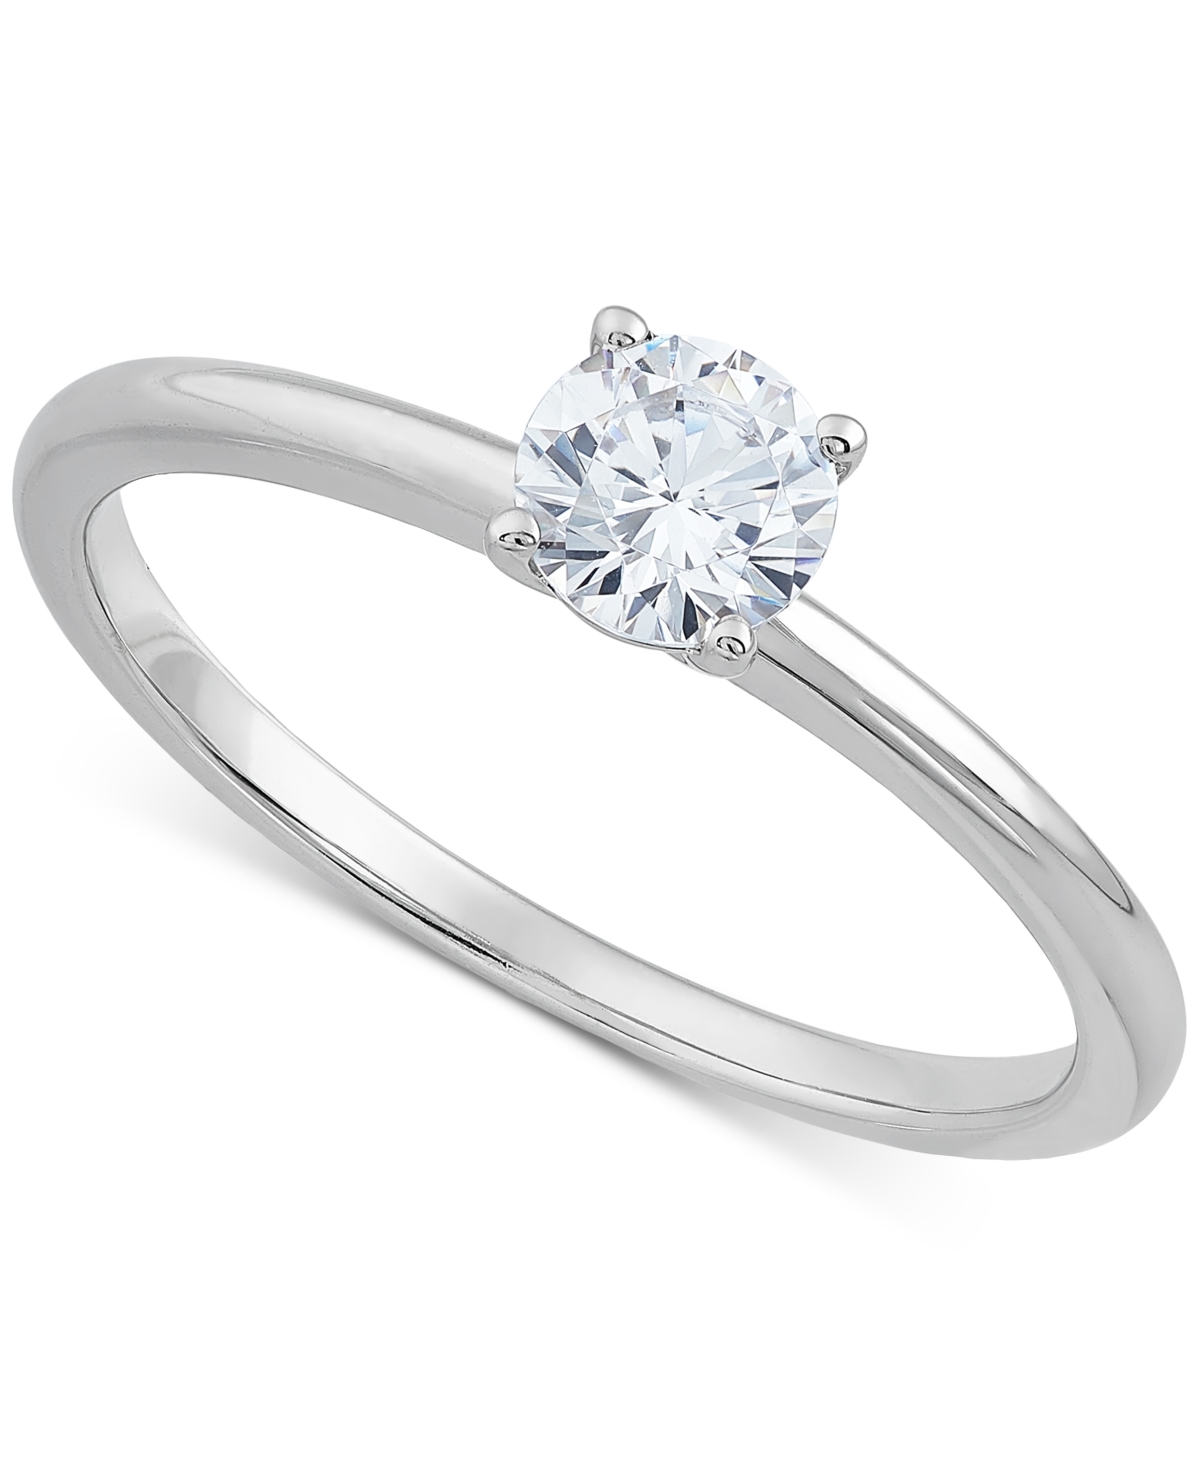 Grown With Love Igi Certified Lab Grown Diamond Engagement Ring (1/2 ct. t.w.) in 14k White or Yellow Gold